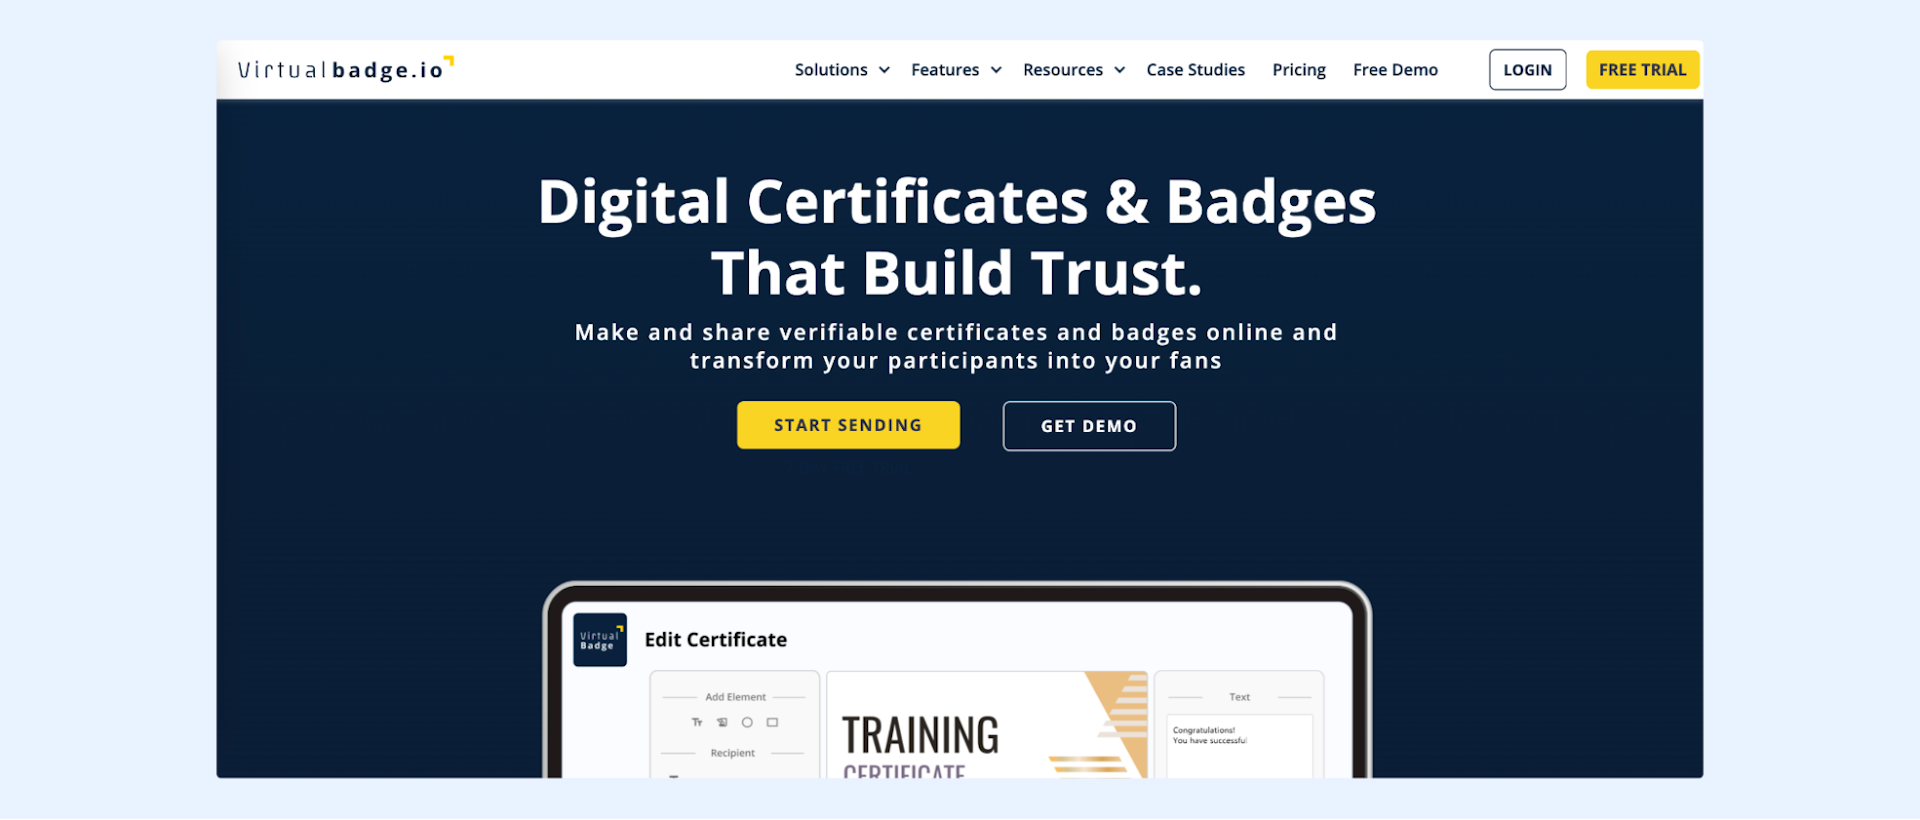 Virtualbadge.io - reliable digital certification as one of the best digital certificates maker to reward students and employees.